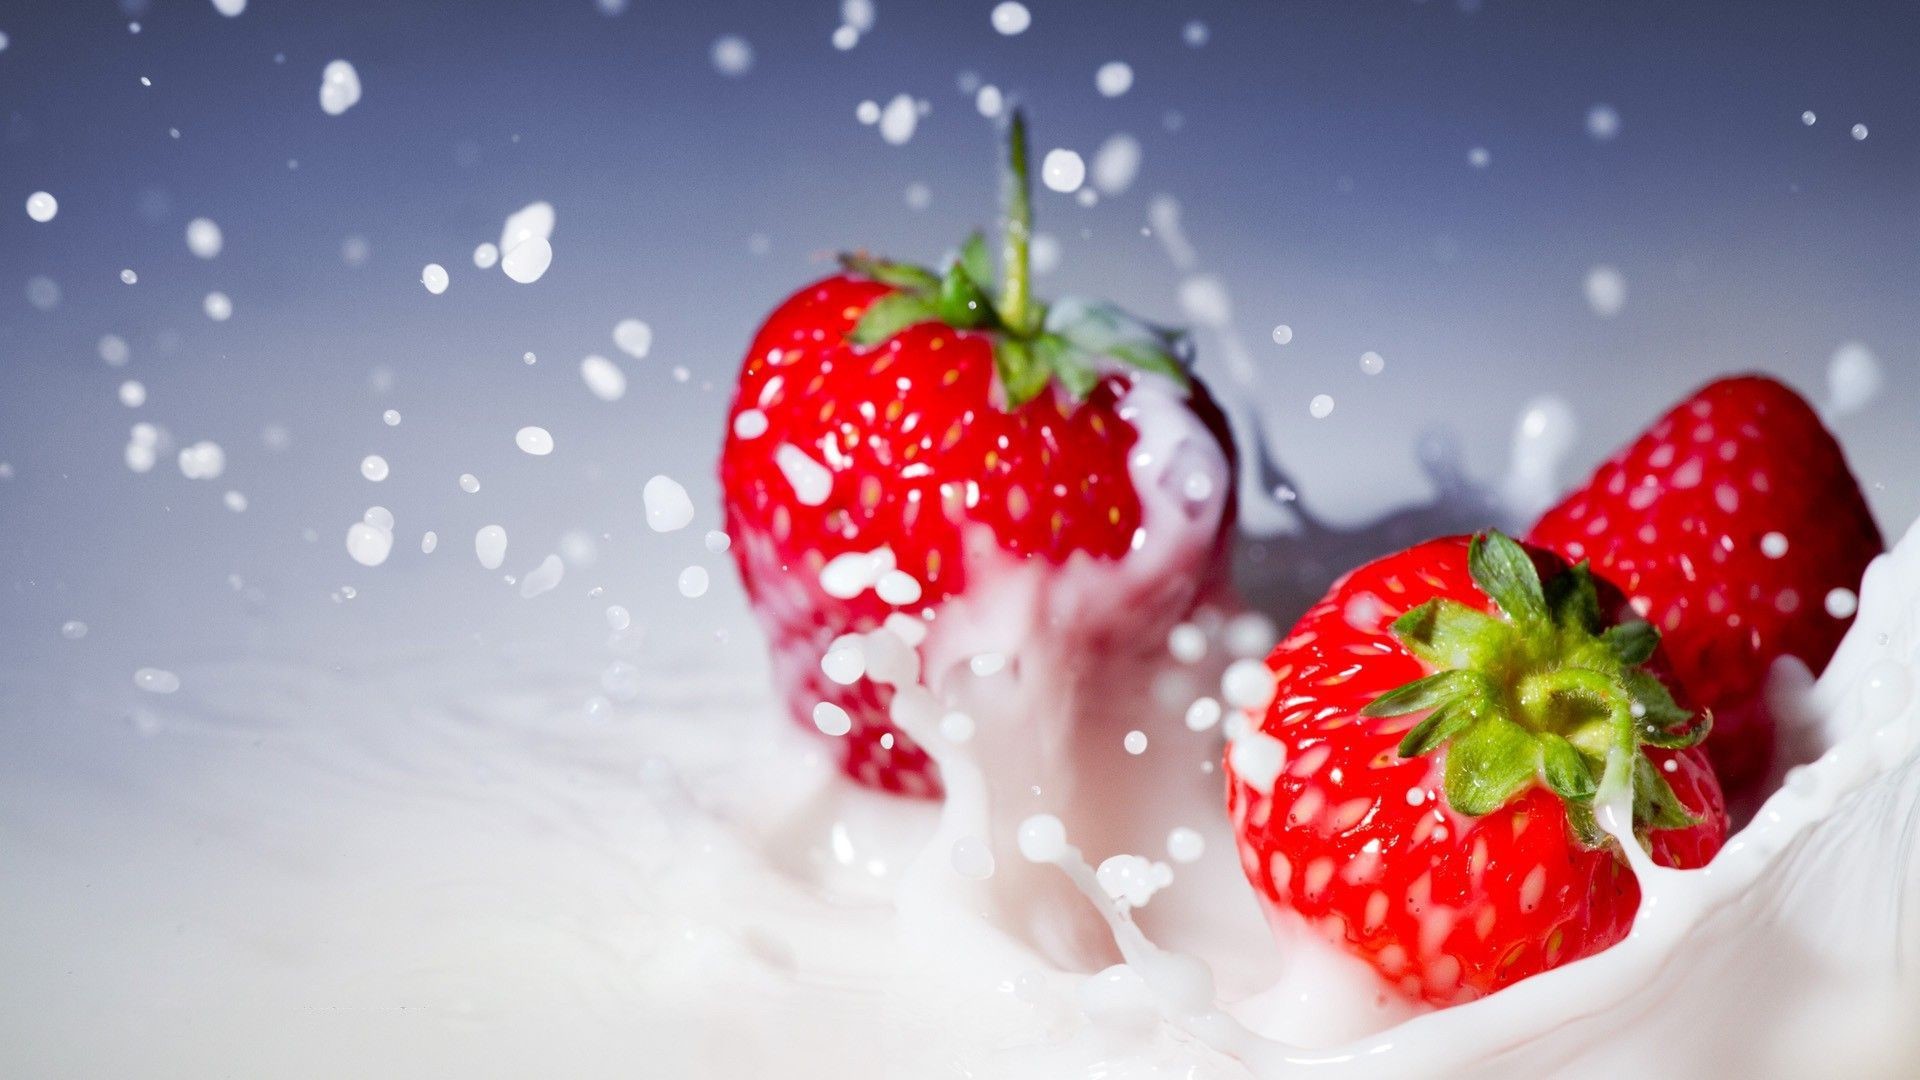 1920x1080 Strawberries and whipped cream HD Wallpaper 